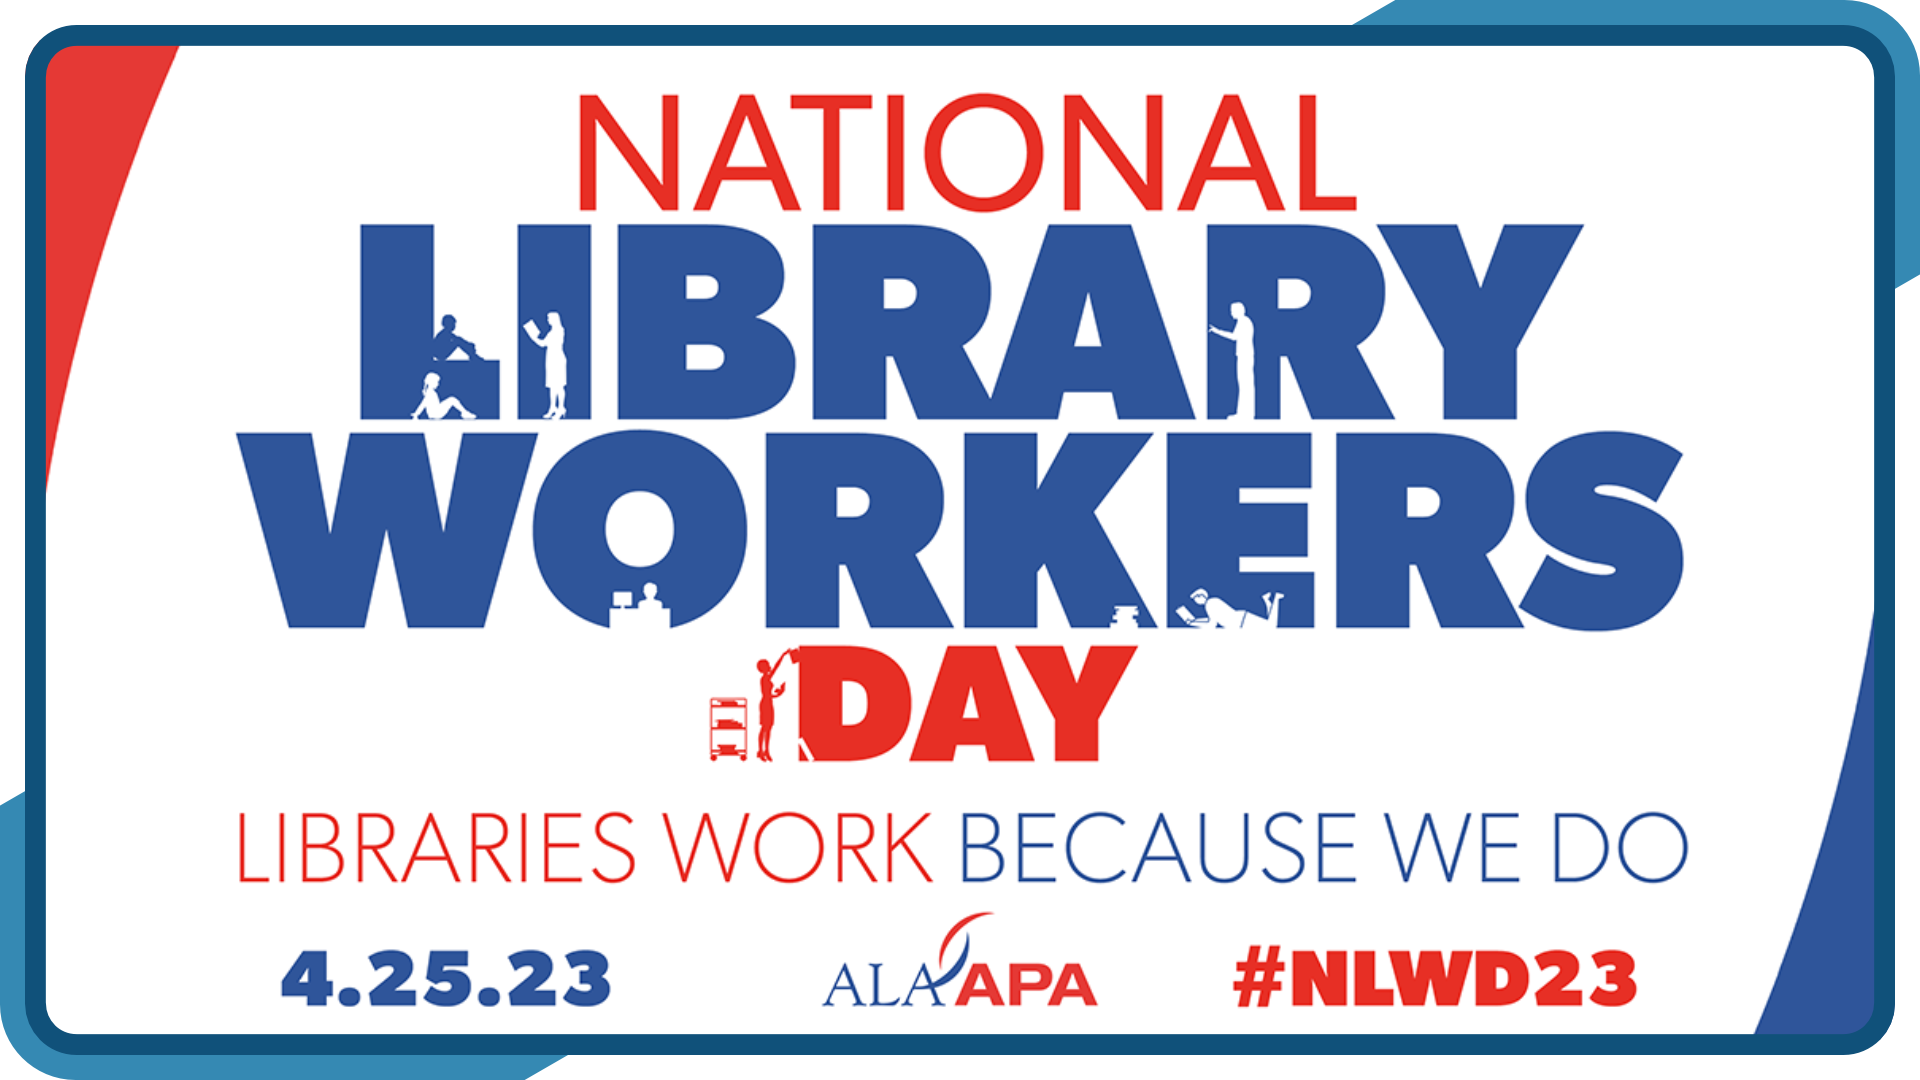 Nominate a stellar librarian on National Library Workers Day, April 25th